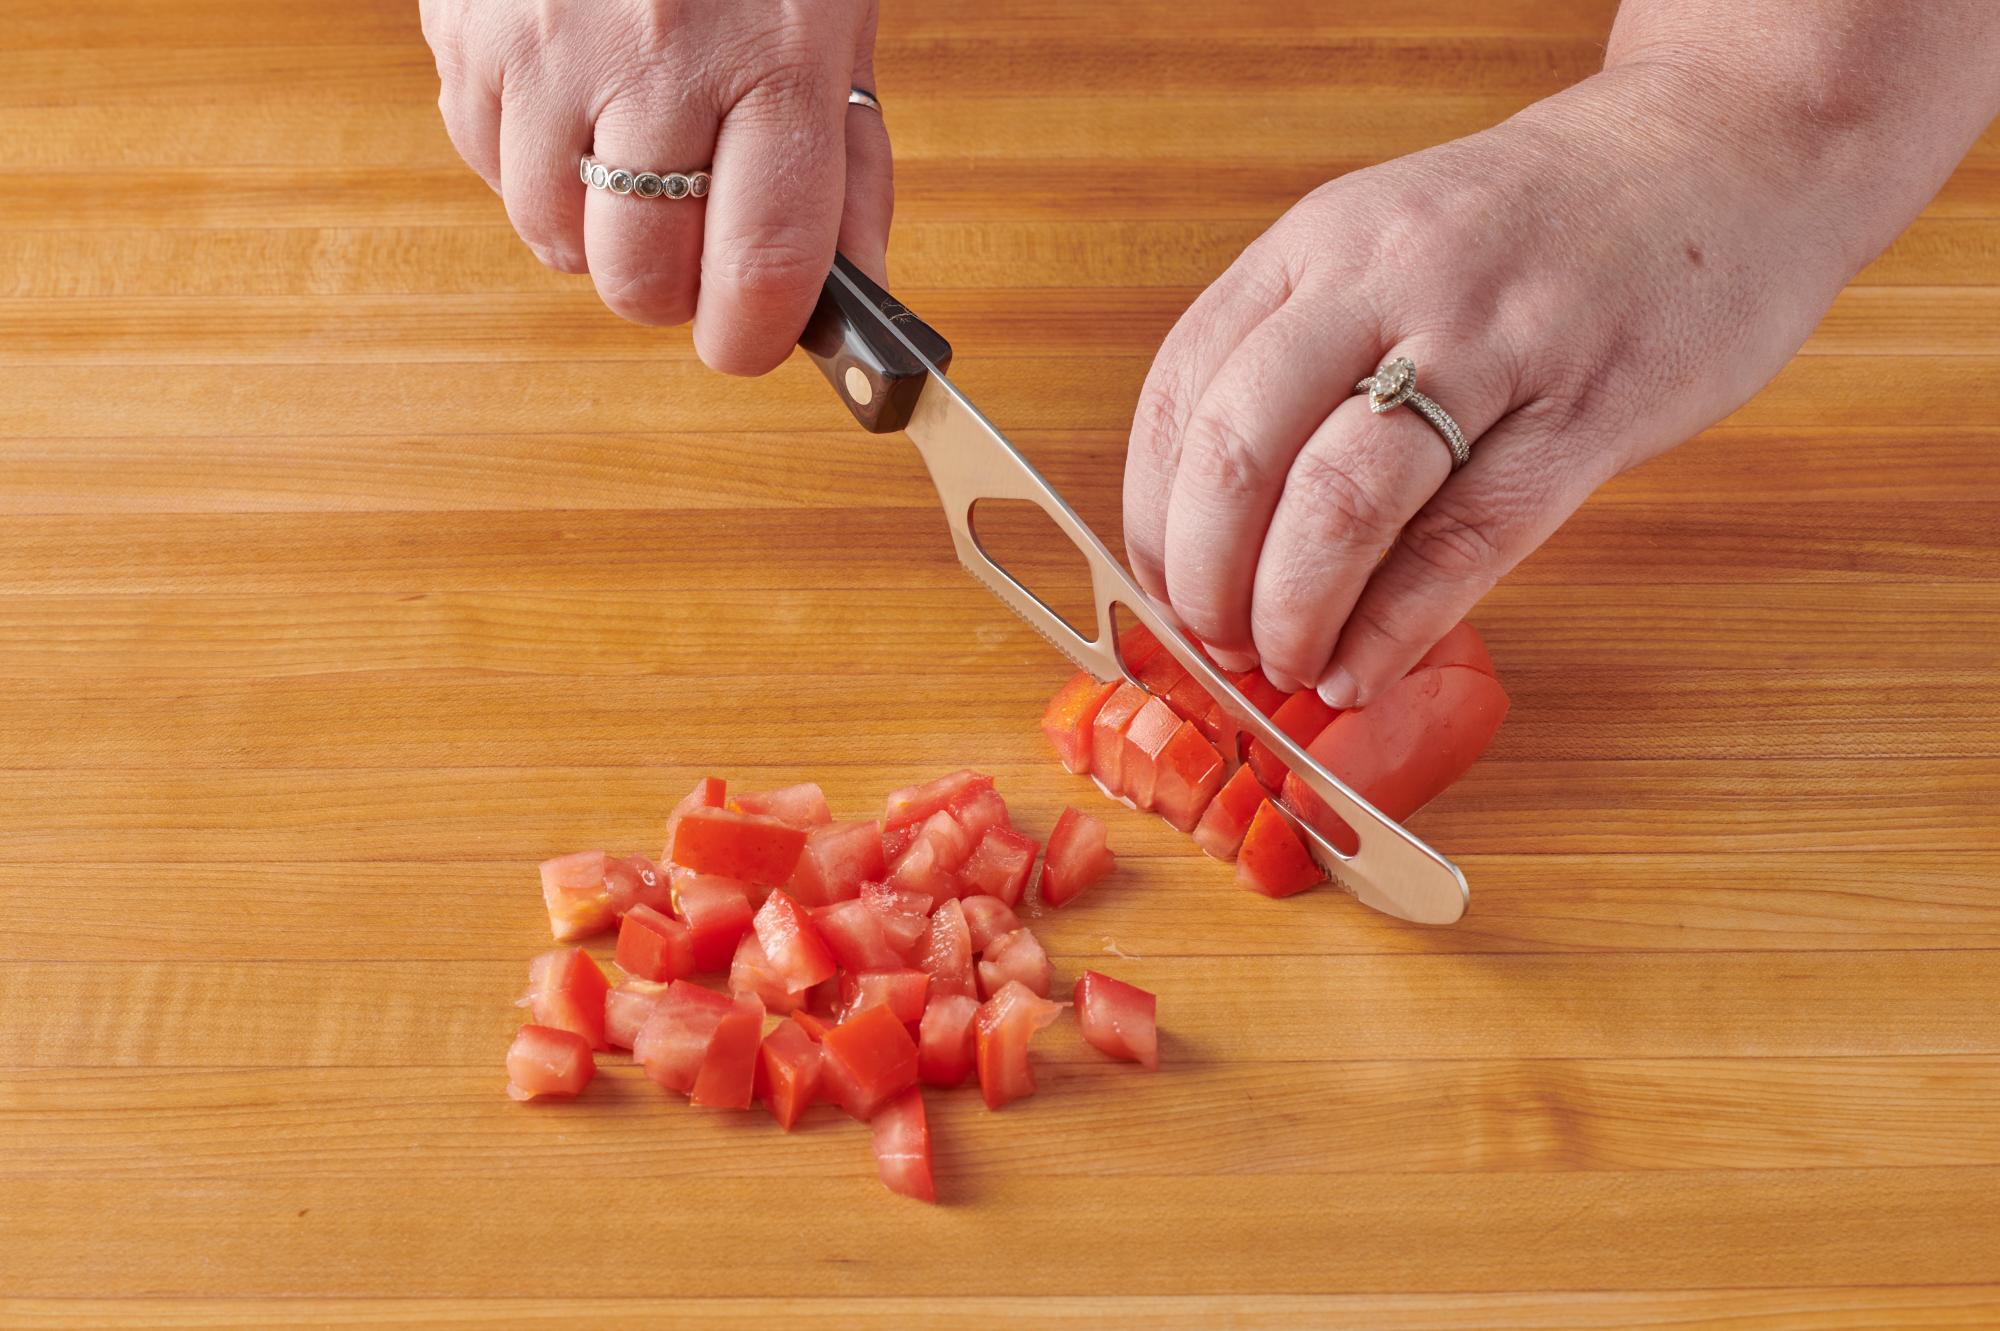 Cutting the tomato with a Traditional Cheese Knife.